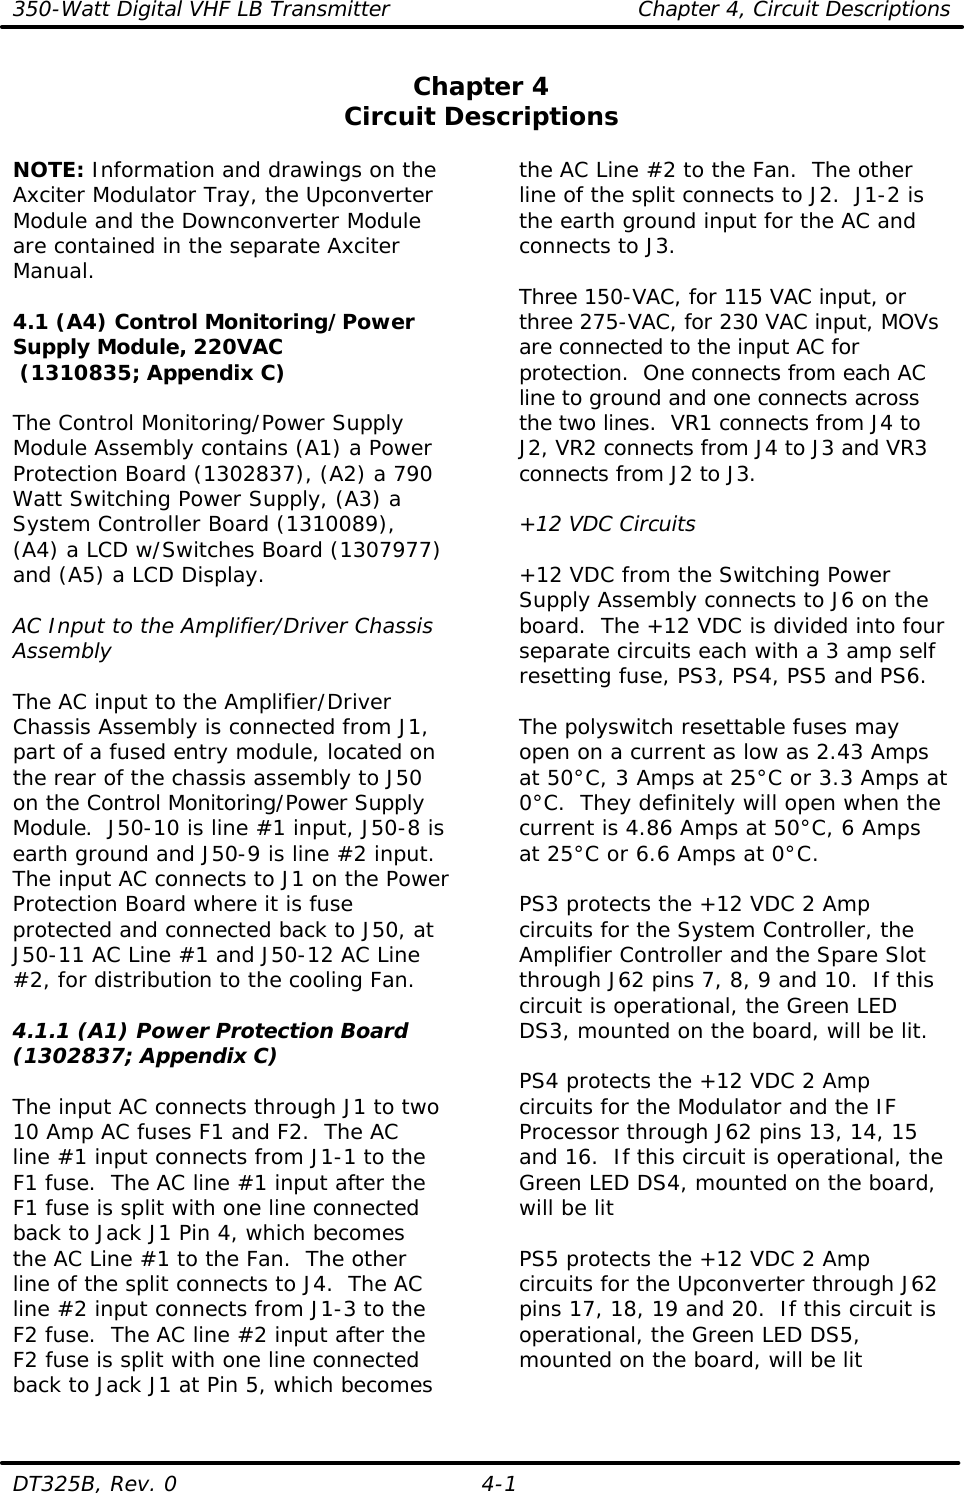 350-Watt Digital VHF LB Transmitter Chapter 4, Circuit Descriptions  DT325B, Rev. 0 4-1 Chapter 4 Circuit Descriptions  NOTE: Information and drawings on the Axciter Modulator Tray, the Upconverter Module and the Downconverter Module are contained in the separate Axciter Manual.  4.1 (A4) Control Monitoring/Power Supply Module, 220VAC  (1310835; Appendix C)  The Control Monitoring/Power Supply Module Assembly contains (A1) a Power Protection Board (1302837), (A2) a 790 Watt Switching Power Supply, (A3) a System Controller Board (1310089), (A4) a LCD w/Switches Board (1307977) and (A5) a LCD Display.  AC Input to the Amplifier/Driver Chassis Assembly  The AC input to the Amplifier/Driver Chassis Assembly is connected from J1, part of a fused entry module, located on the rear of the chassis assembly to J50 on the Control Monitoring/Power Supply Module.  J50-10 is line #1 input, J50-8 is earth ground and J50-9 is line #2 input.  The input AC connects to J1 on the Power Protection Board where it is fuse protected and connected back to J50, at J50-11 AC Line #1 and J50-12 AC Line #2, for distribution to the cooling Fan.  4.1.1 (A1) Power Protection Board (1302837; Appendix C)  The input AC connects through J1 to two 10 Amp AC fuses F1 and F2.  The AC line #1 input connects from J1-1 to the F1 fuse.  The AC line #1 input after the F1 fuse is split with one line connected back to Jack J1 Pin 4, which becomes the AC Line #1 to the Fan.  The other line of the split connects to J4.  The AC line #2 input connects from J1-3 to the F2 fuse.  The AC line #2 input after the F2 fuse is split with one line connected back to Jack J1 at Pin 5, which becomes the AC Line #2 to the Fan.  The other line of the split connects to J2.  J1-2 is the earth ground input for the AC and connects to J3.  Three 150-VAC, for 115 VAC input, or three 275-VAC, for 230 VAC input, MOVs are connected to the input AC for protection.  One connects from each AC line to ground and one connects across the two lines.  VR1 connects from J4 to J2, VR2 connects from J4 to J3 and VR3 connects from J2 to J3.  +12 VDC Circuits  +12 VDC from the Switching Power Supply Assembly connects to J6 on the board.  The +12 VDC is divided into four separate circuits each with a 3 amp self resetting fuse, PS3, PS4, PS5 and PS6.  The polyswitch resettable fuses may open on a current as low as 2.43 Amps at 50°C, 3 Amps at 25°C or 3.3 Amps at 0°C.  They definitely will open when the current is 4.86 Amps at 50°C, 6 Amps at 25°C or 6.6 Amps at 0°C.  PS3 protects the +12 VDC 2 Amp circuits for the System Controller, the Amplifier Controller and the Spare Slot through J62 pins 7, 8, 9 and 10.  If this circuit is operational, the Green LED DS3, mounted on the board, will be lit.  PS4 protects the +12 VDC 2 Amp circuits for the Modulator and the IF Processor through J62 pins 13, 14, 15 and 16.  If this circuit is operational, the Green LED DS4, mounted on the board, will be lit  PS5 protects the +12 VDC 2 Amp circuits for the Upconverter through J62 pins 17, 18, 19 and 20.  If this circuit is operational, the Green LED DS5, mounted on the board, will be lit  